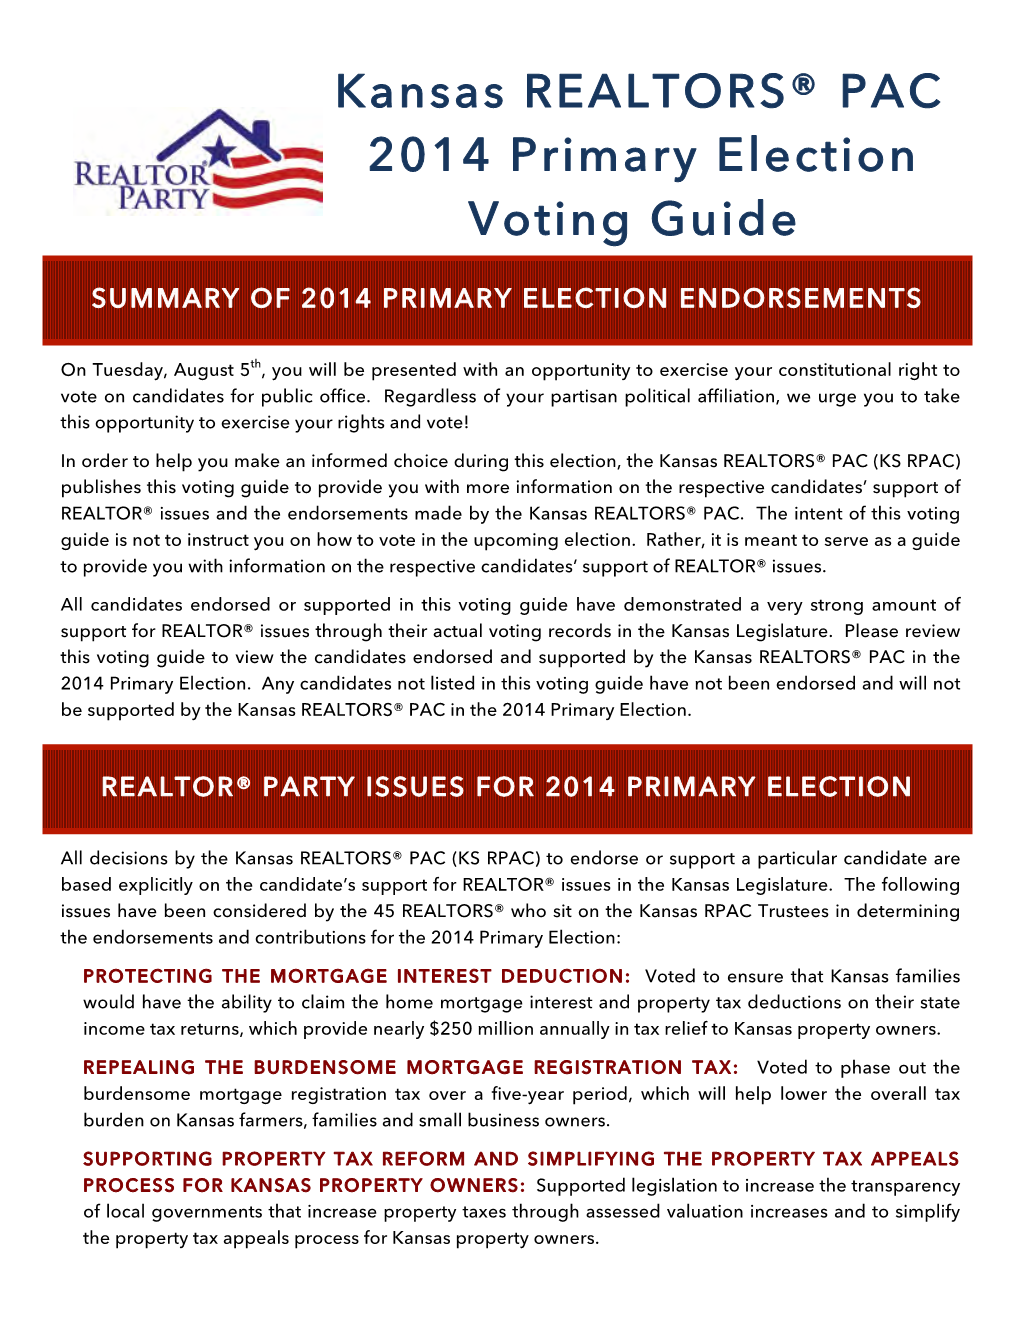 2014 KS RPAC Primary Election Voting Guide